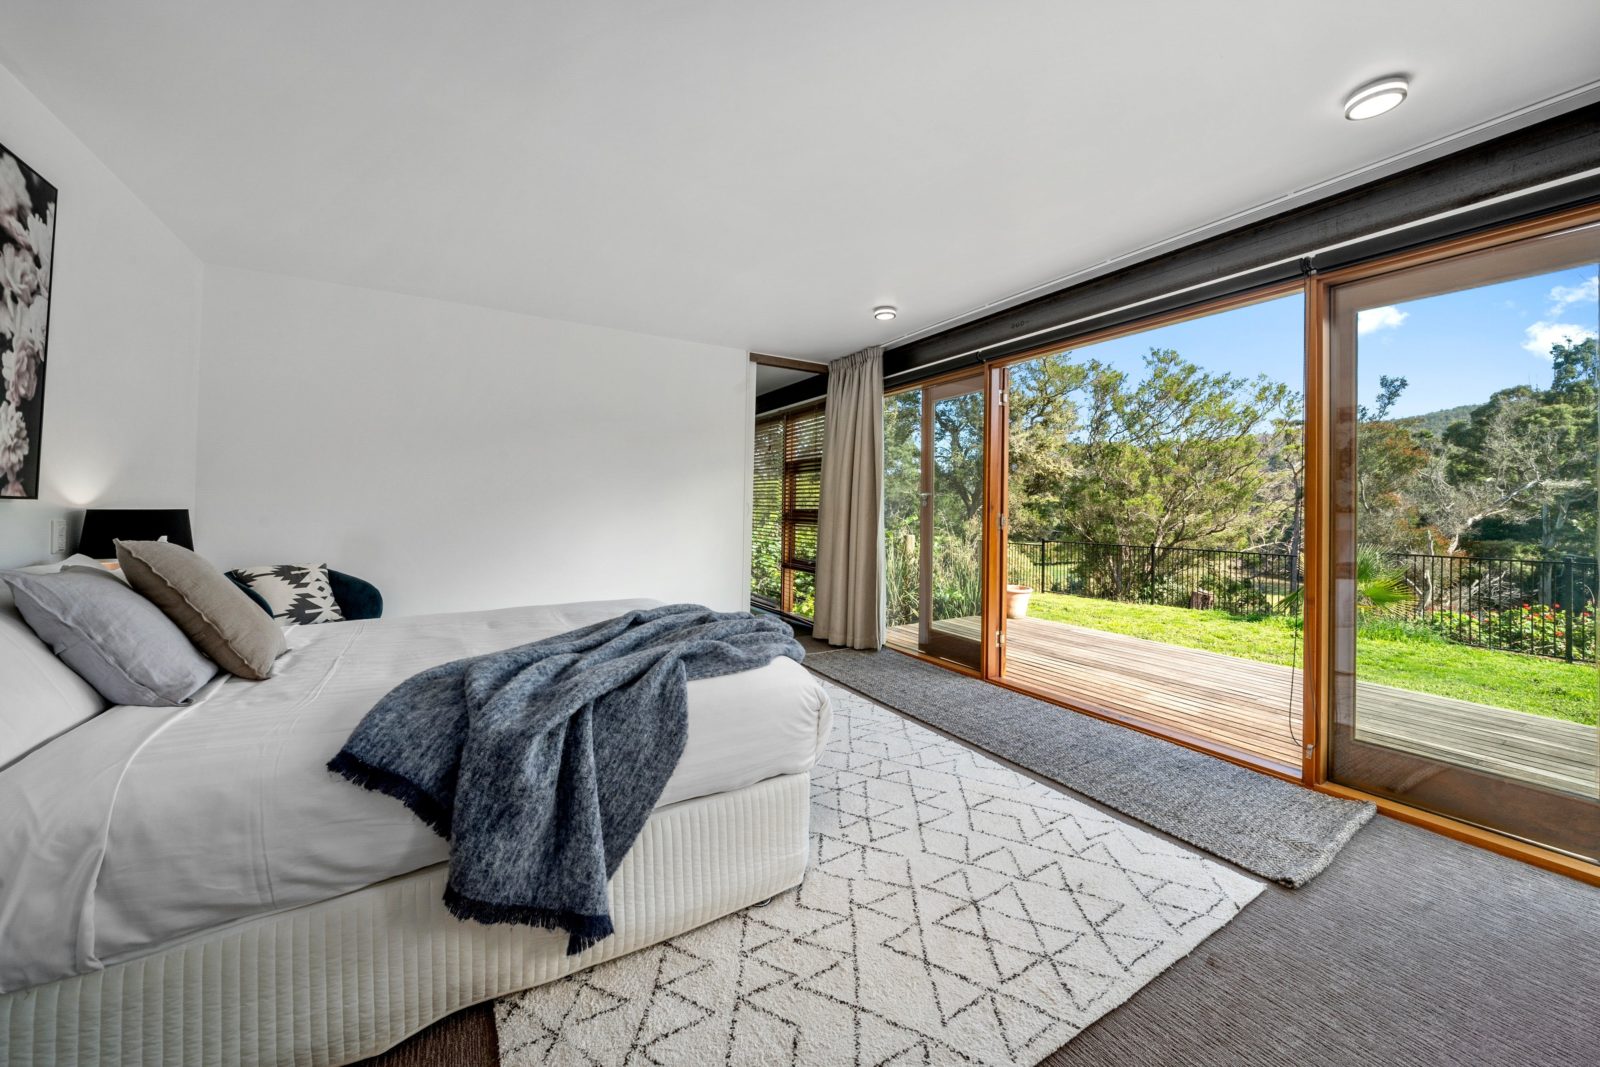 Master bedroom has an adjoining deck overlooking the river.